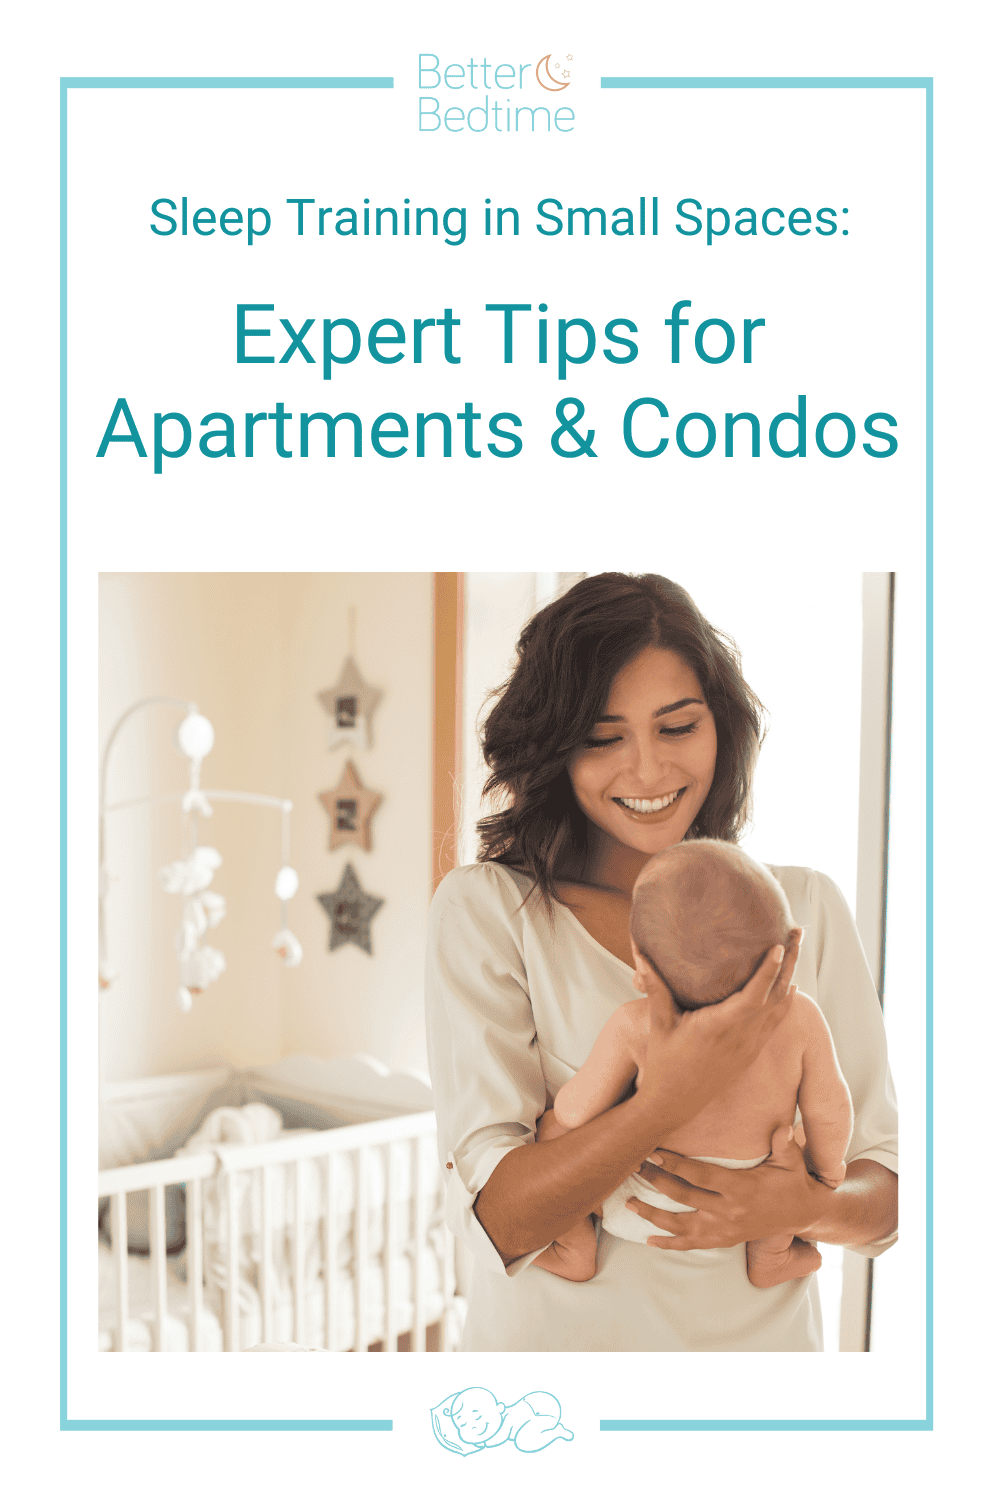 Sleep Train in Small Spaces: Expert Tips for Apartments & Condos